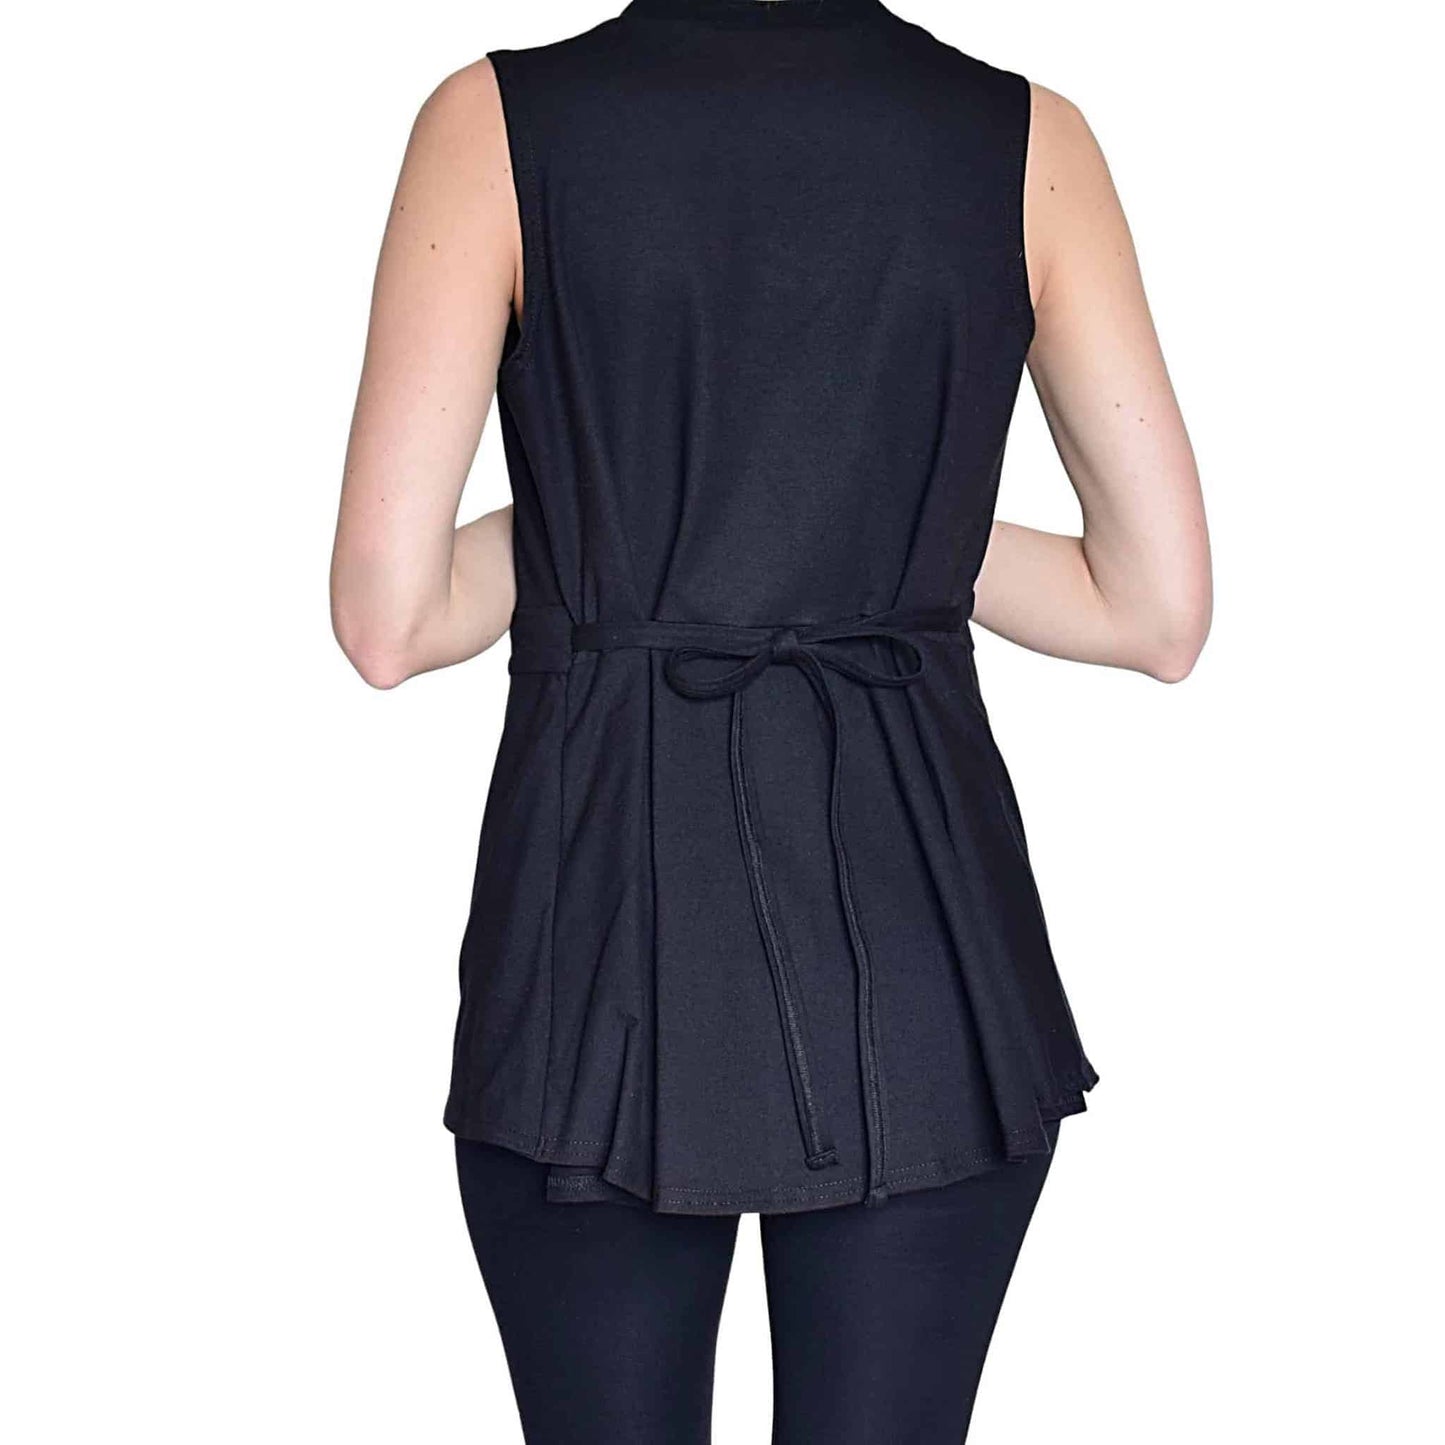 Back view of a black recovery cami with customizable ties at sides.